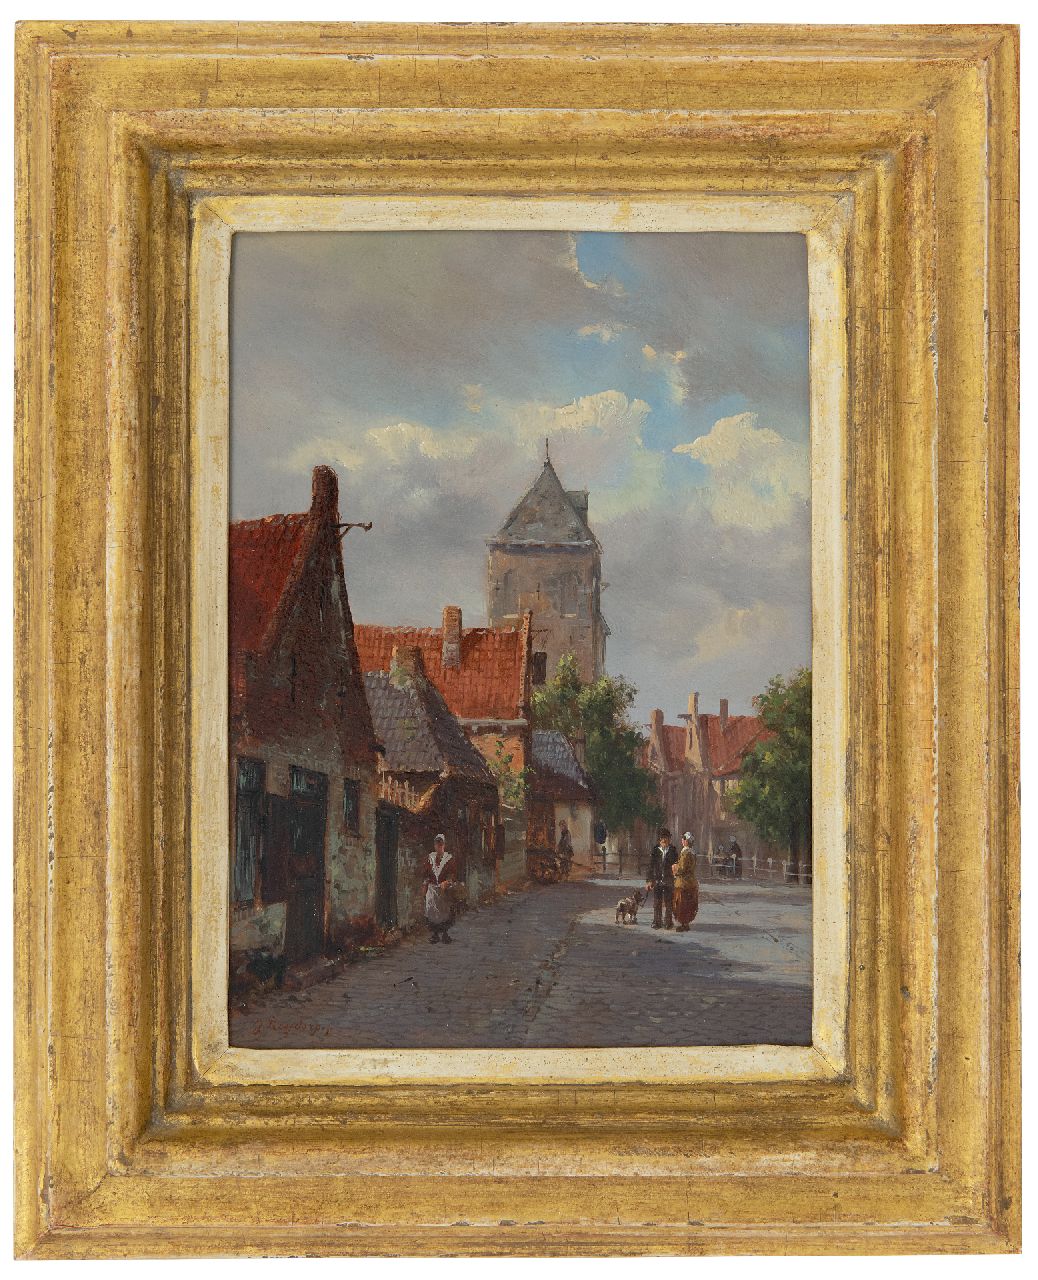 Roosdorp F.  | Frederik Roosdorp | Paintings offered for sale | Sunny street, oil on panel 22.0 x 15.8 cm, signed l.l.